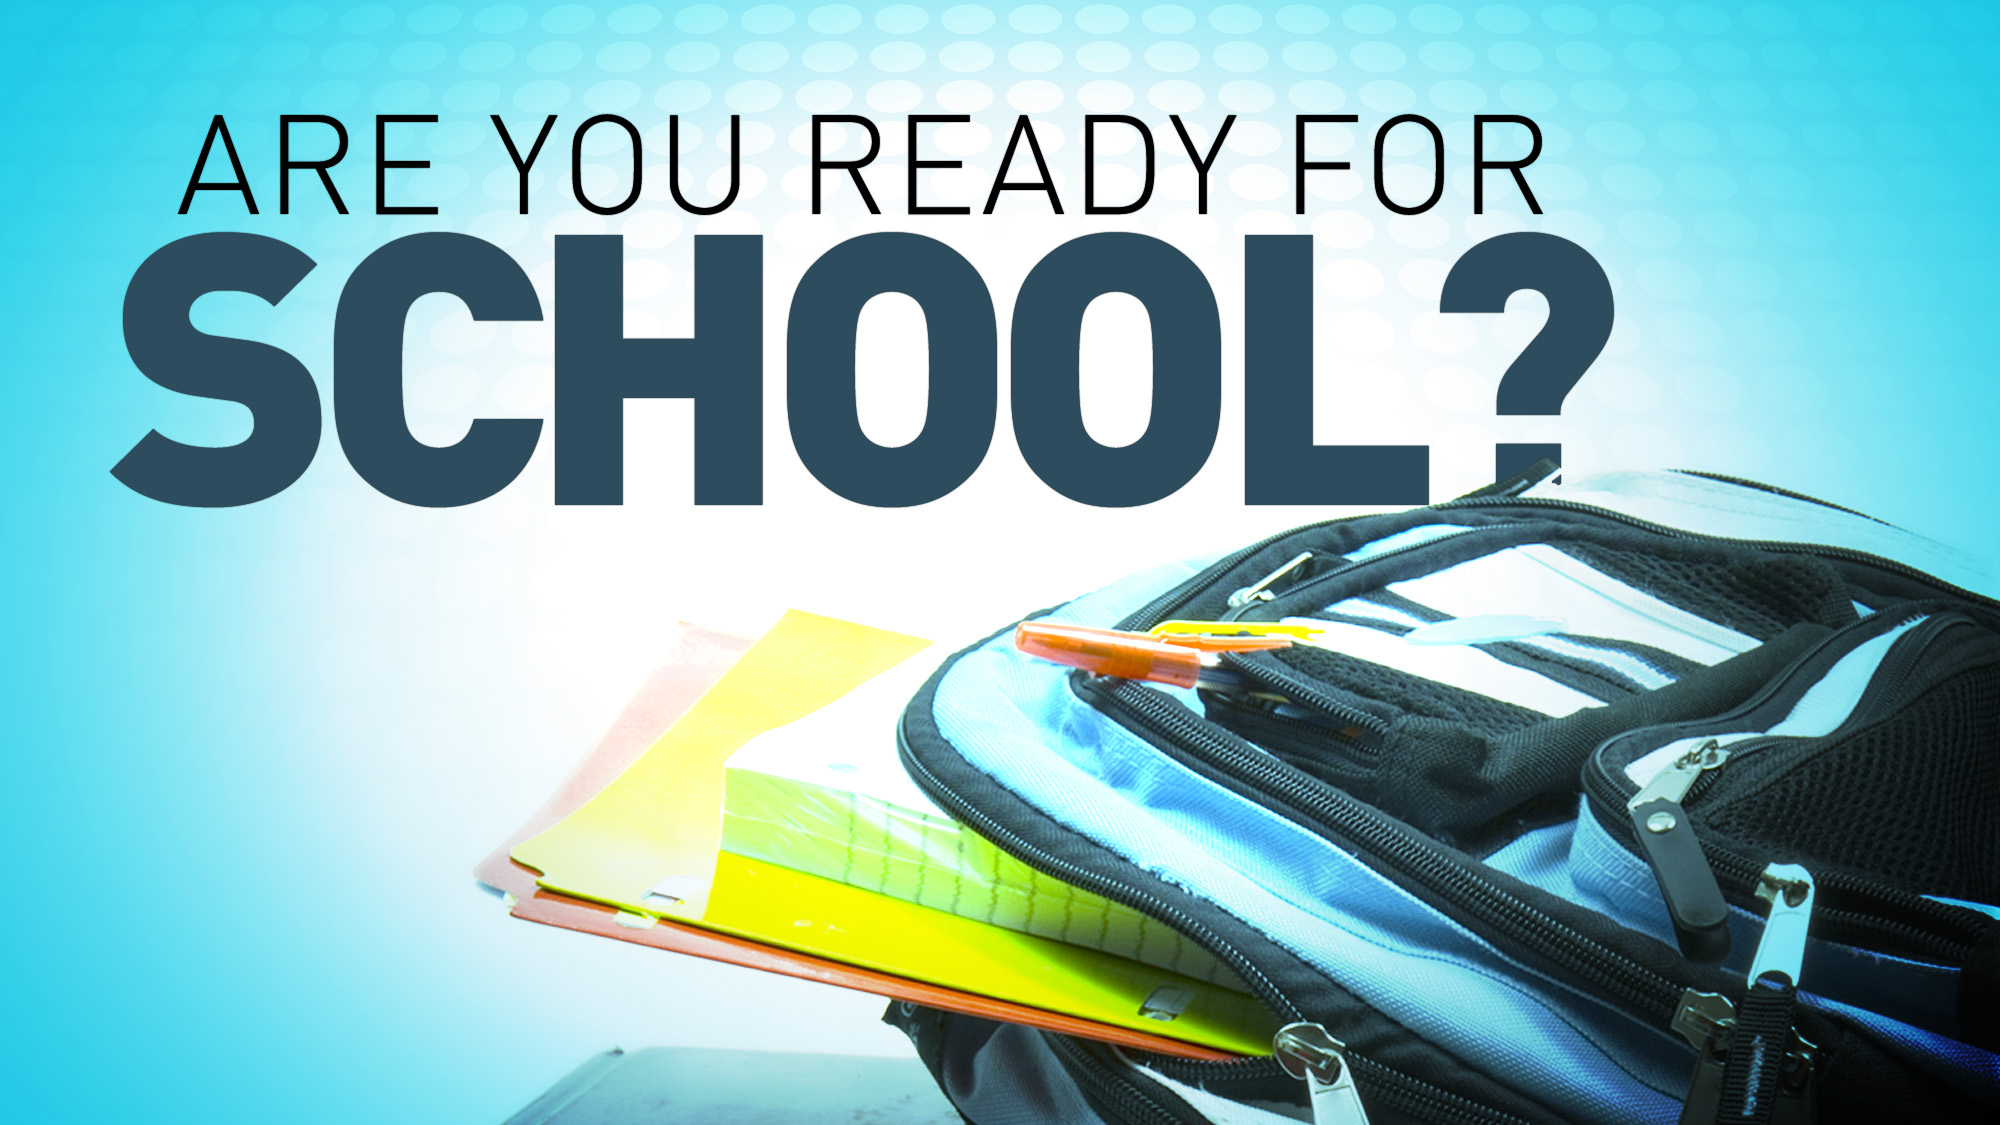 Are you ready for school?